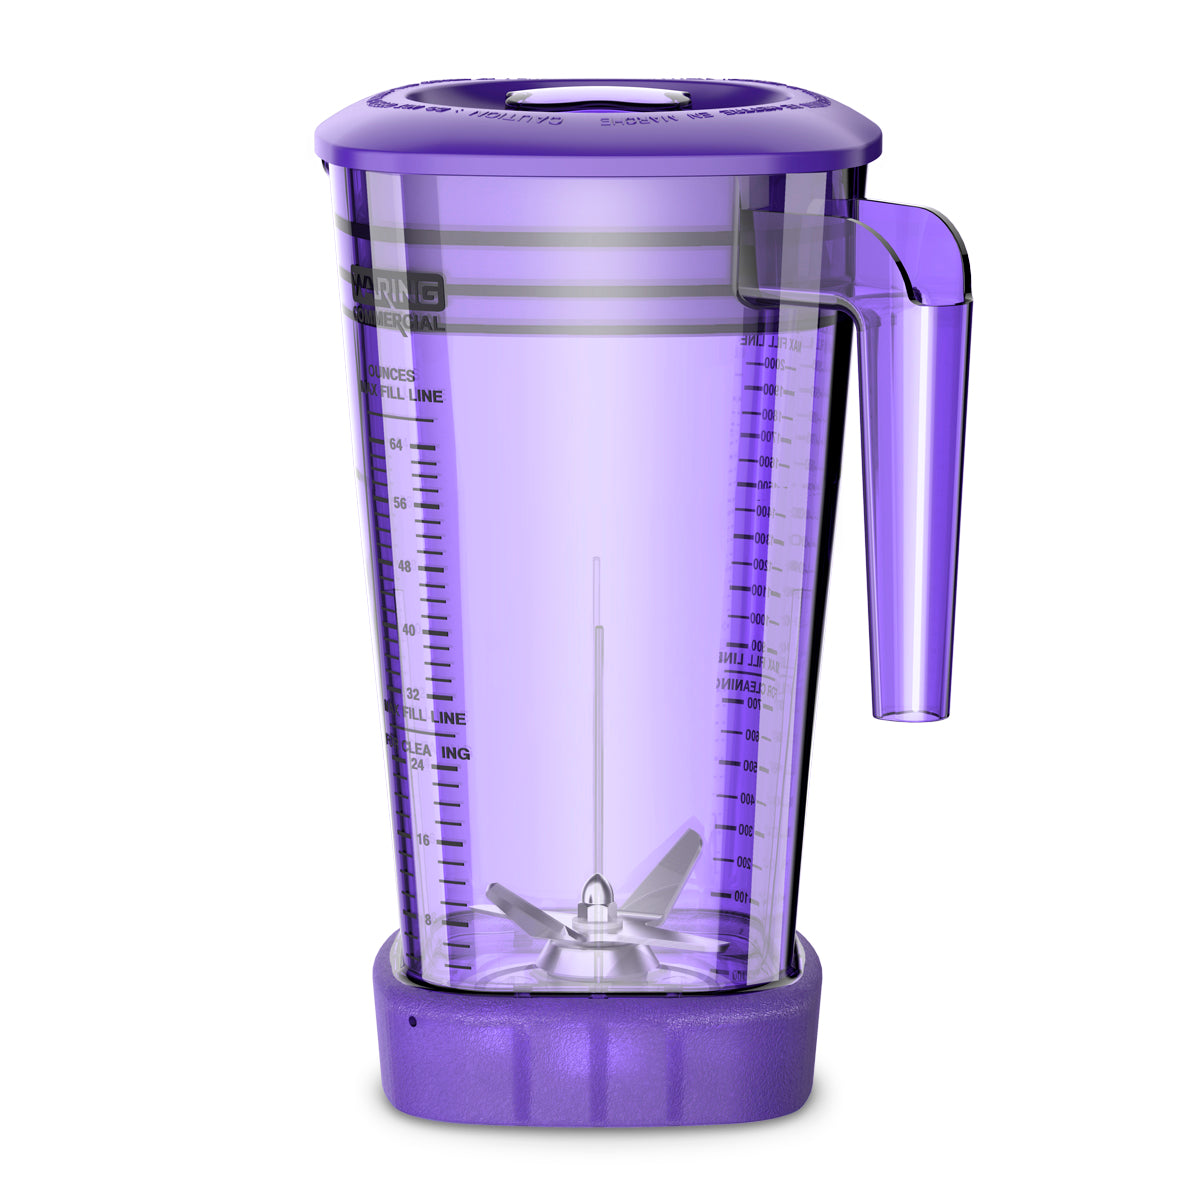 CAC95-10 - "The Raptor" 64-oz. BPA-Free Purple Copolyester Container Complete with Blade and Lid — MX Series